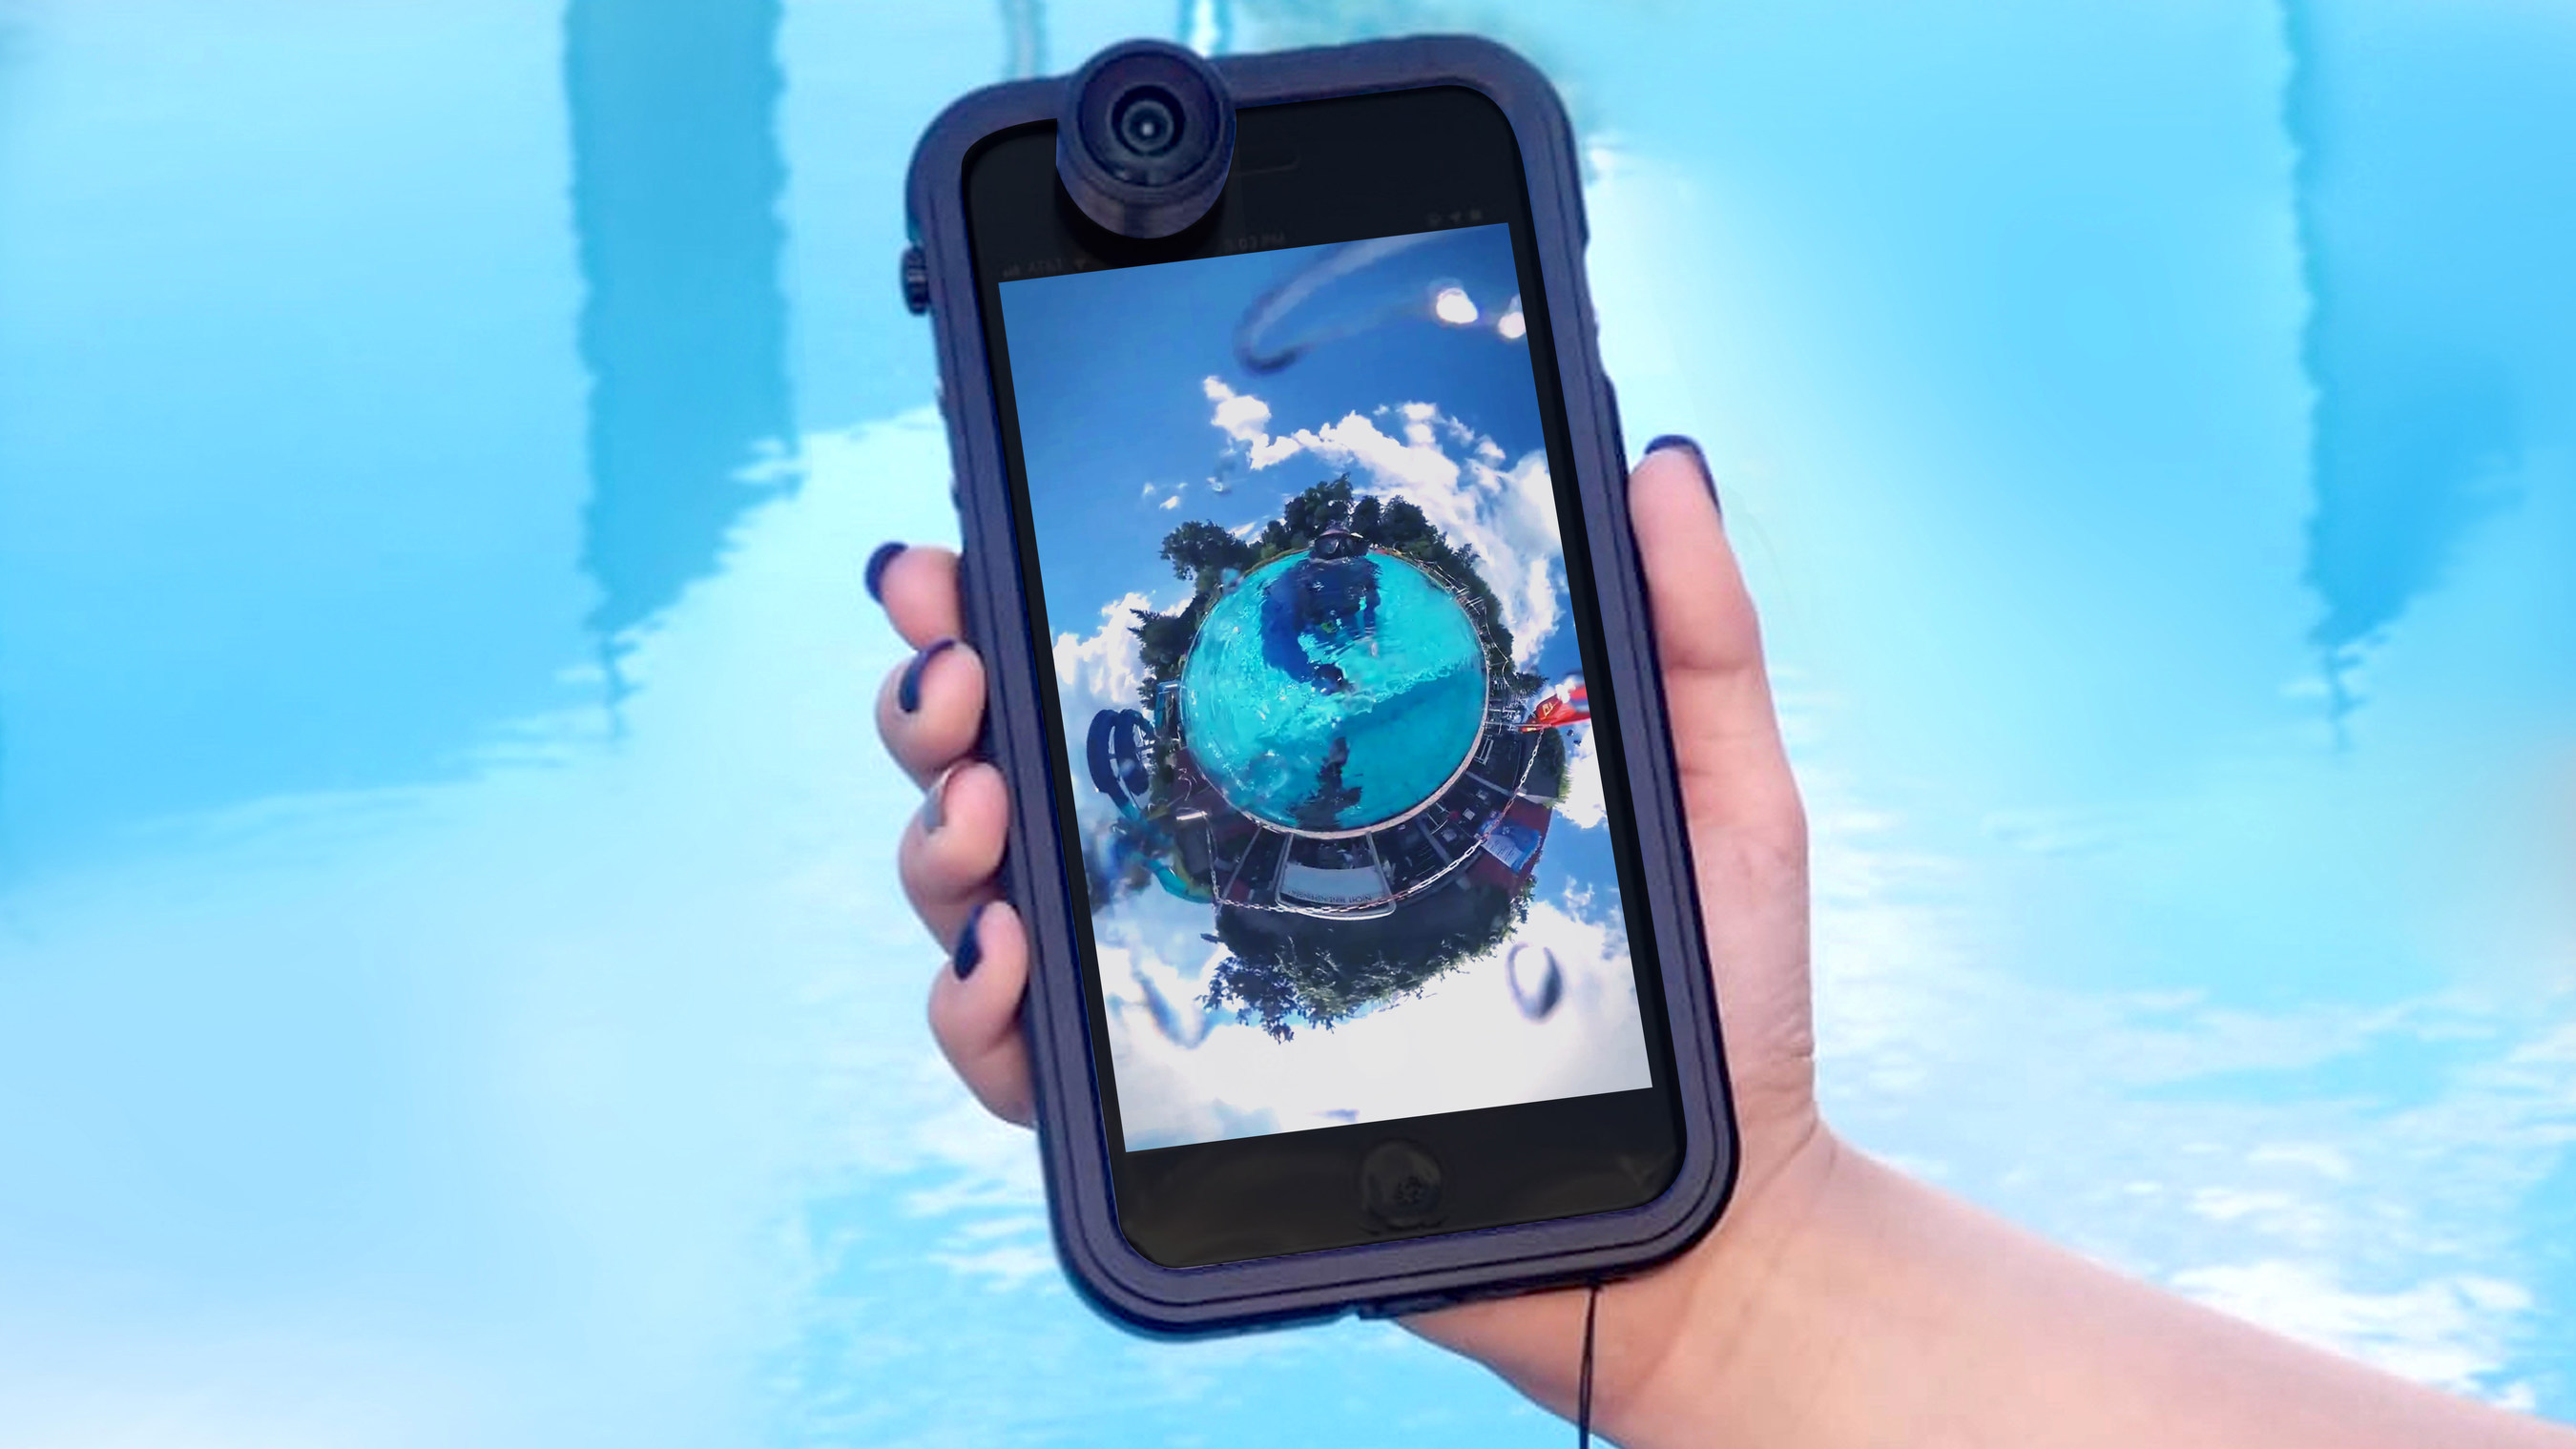 Vyu360 Debuts World’s First Rugged Case Featuring 360 Capturing Capabilities for iPhone at CES 2019